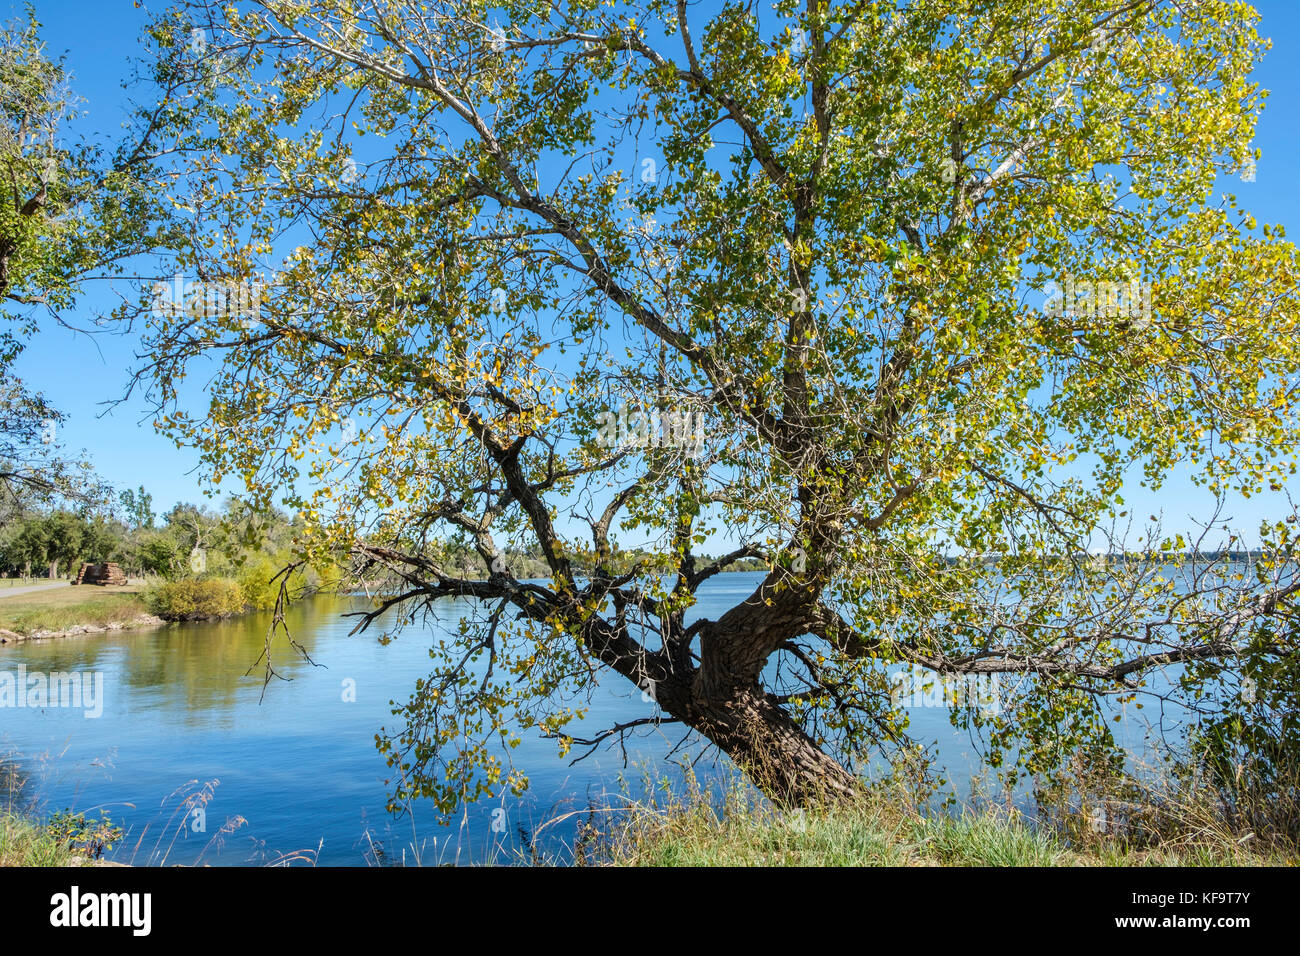 Large mature Eastern Cottonwood tree early autumn growing on the bank of a lake in Oklahoma, USA. Stock Photo